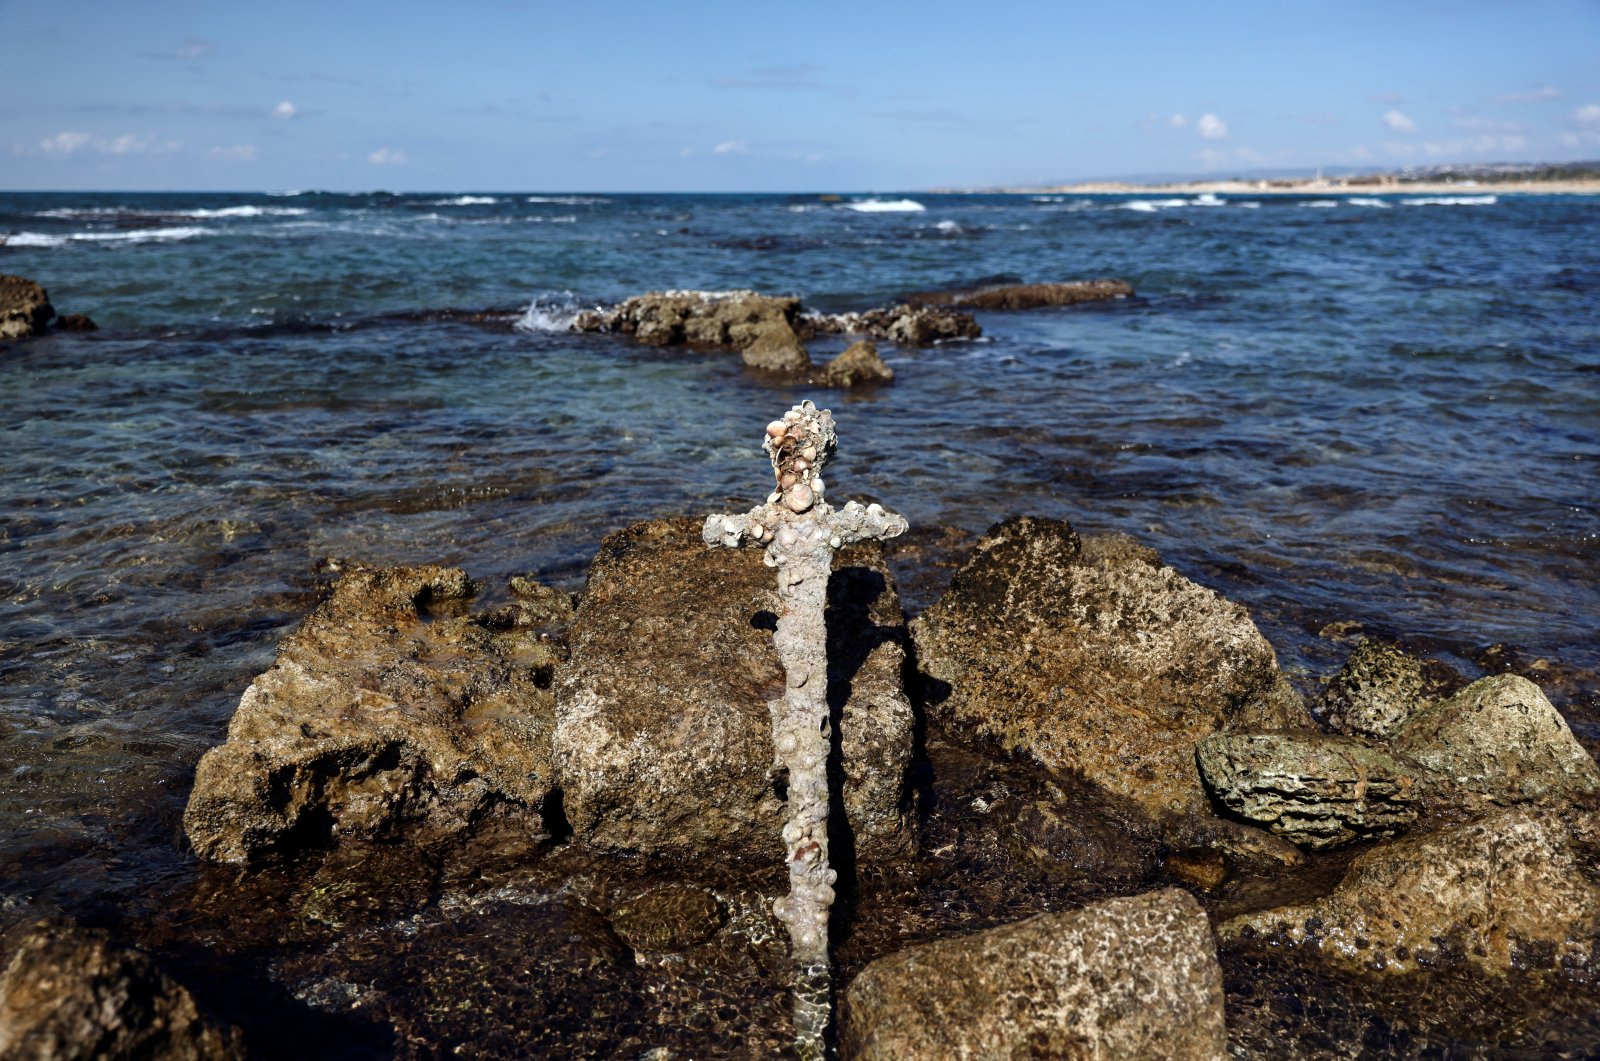 The sword believed to have belonged to a Crusader stands in the water near to where it was recovered from the Mediterranean seabed by an amateur diver, Caesarea, Israel Oct. 18, 2021. (REUTERS Photo)